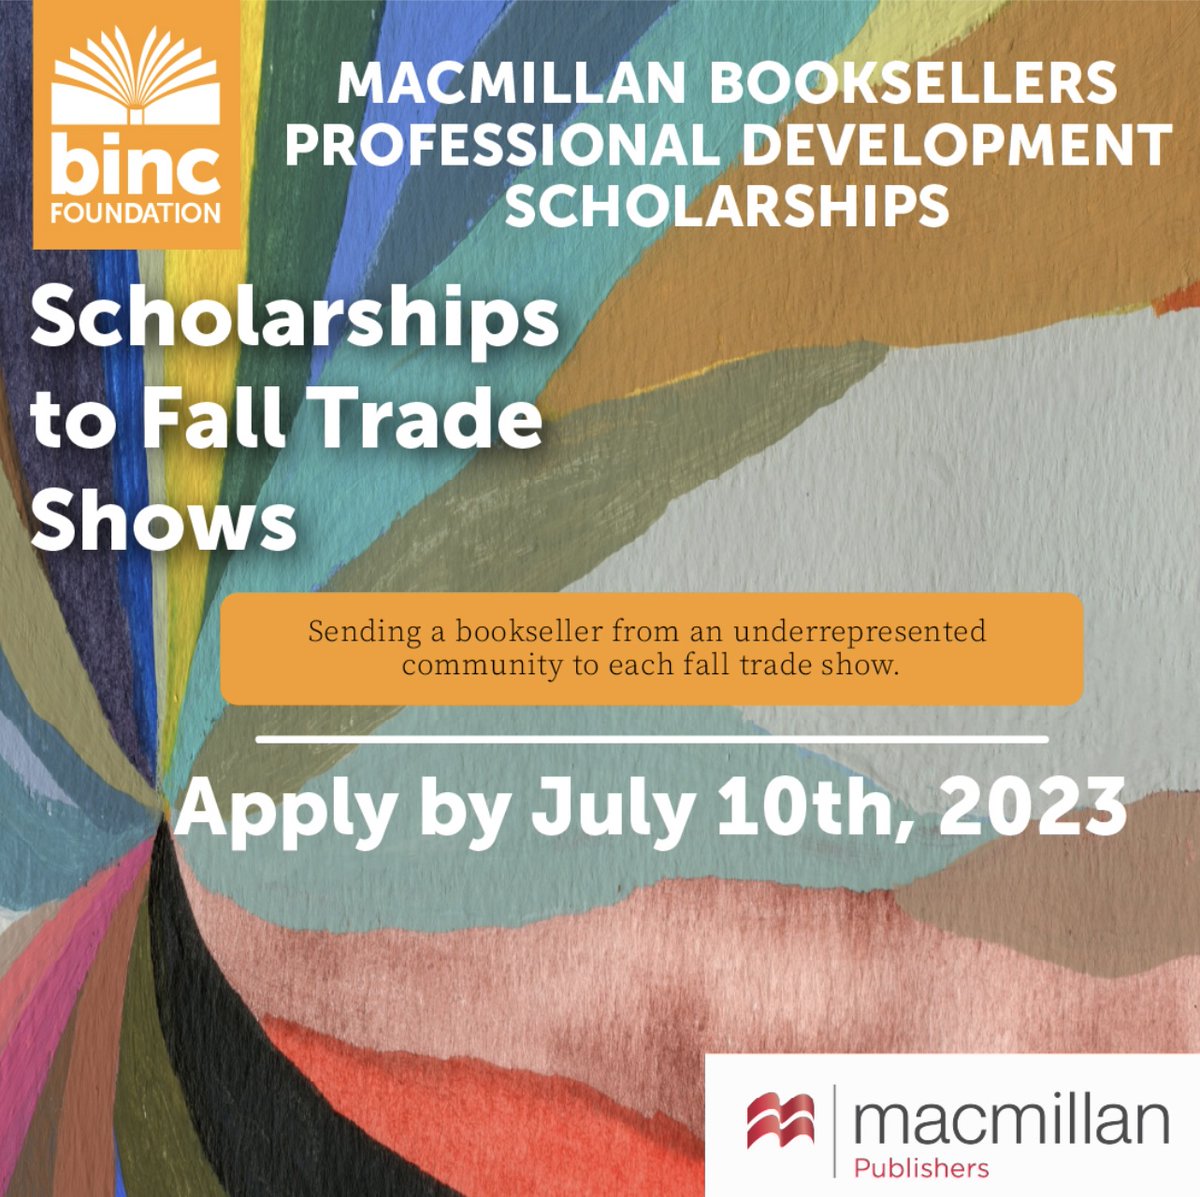 Don't forget to apply to this incredible opportunity from @MacmillanUSA and @BincFoundation by July 10th! Apply here: forms.gle/H1FZ2R2haaPvjm…